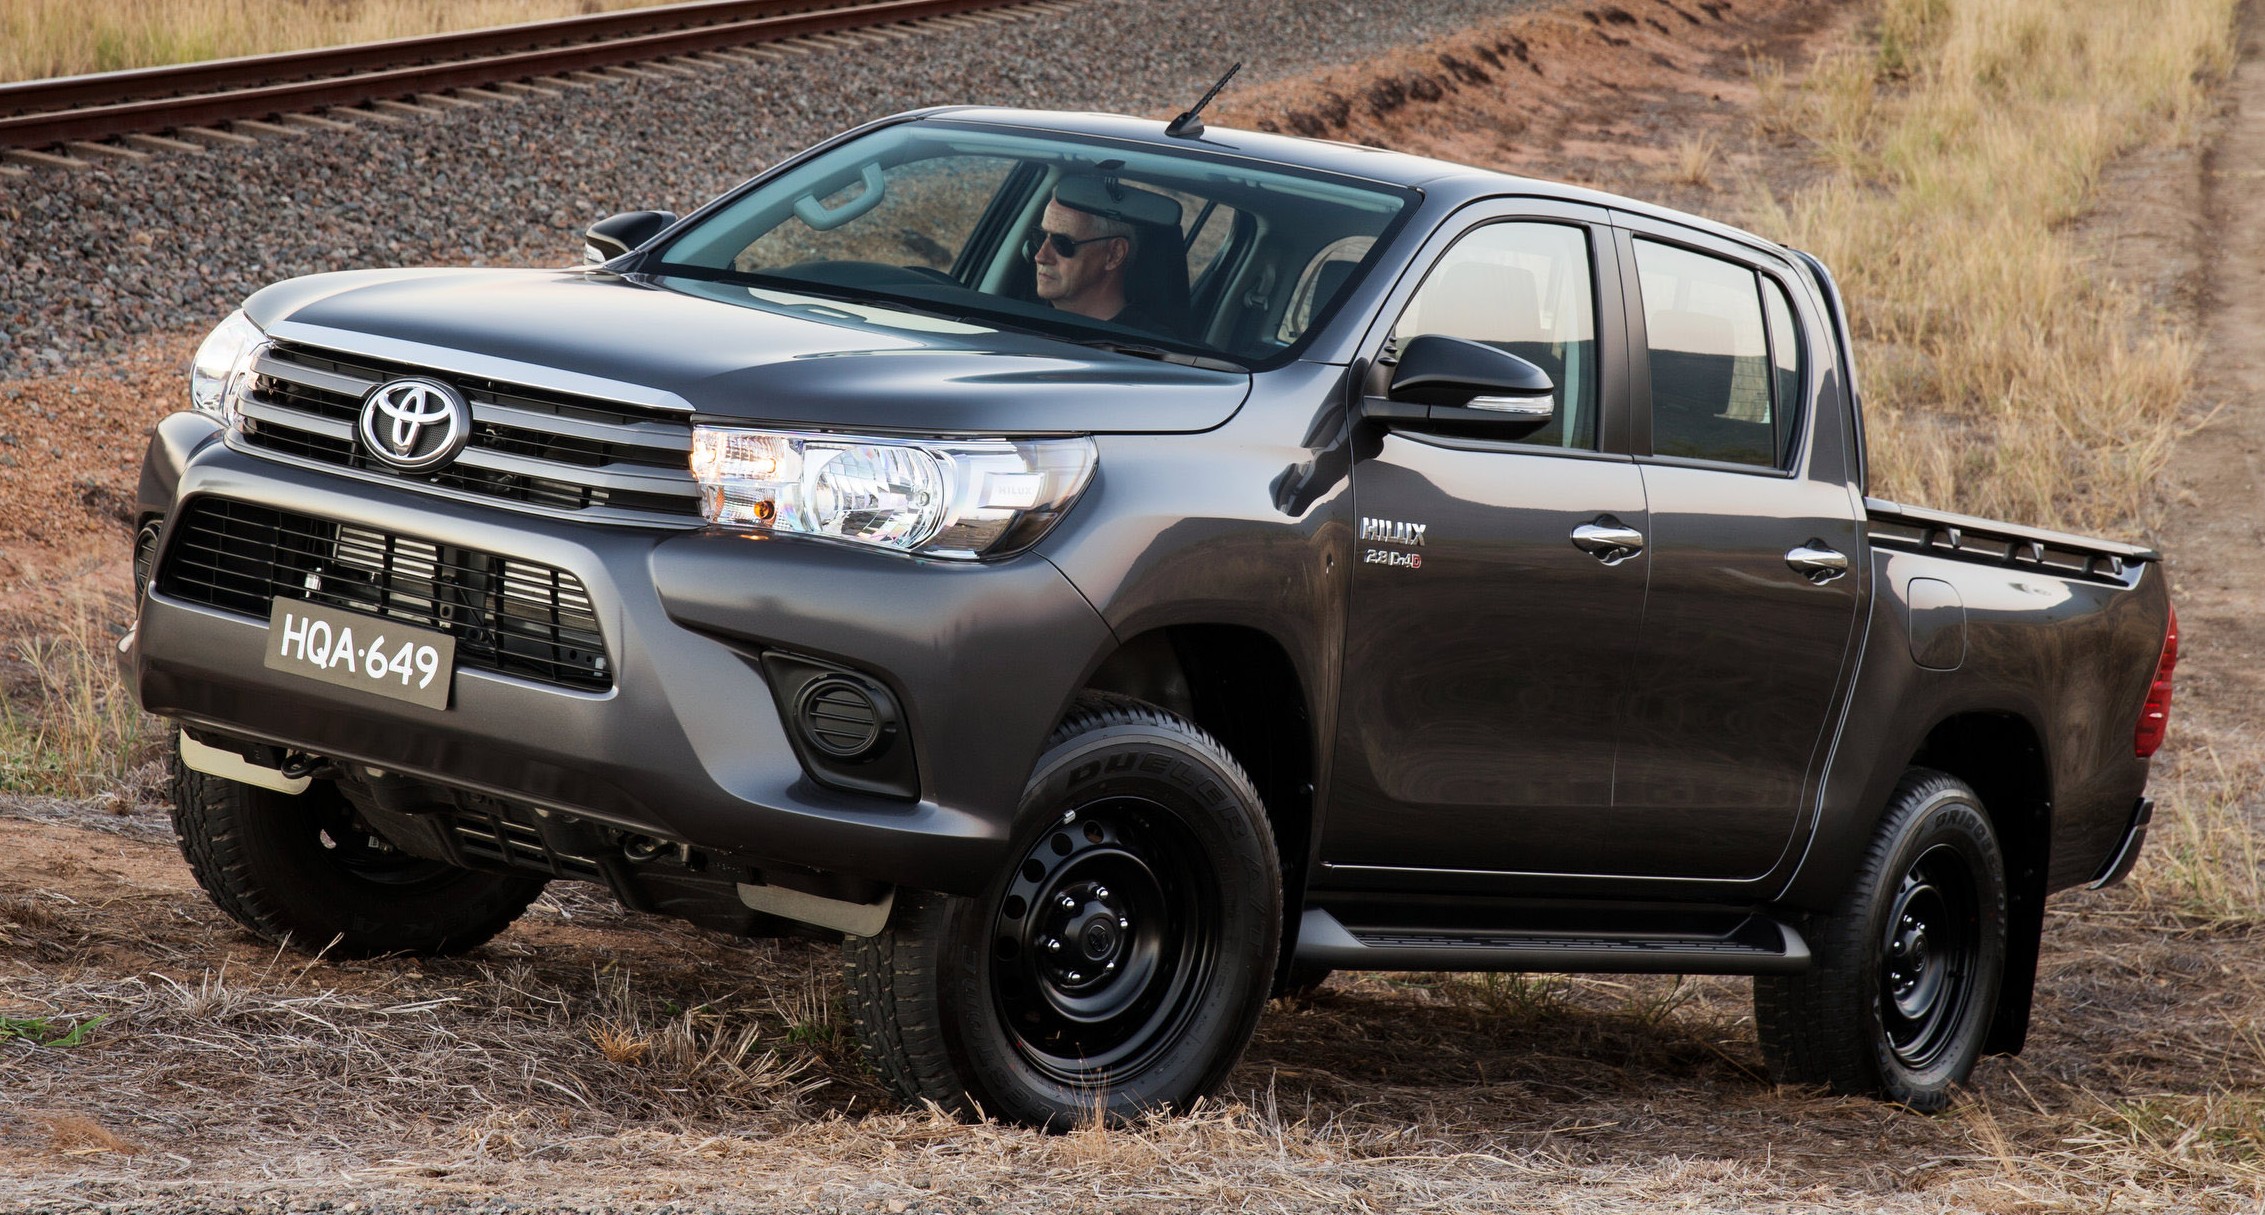 Toyota's Australian Technical Centre to close by 2016